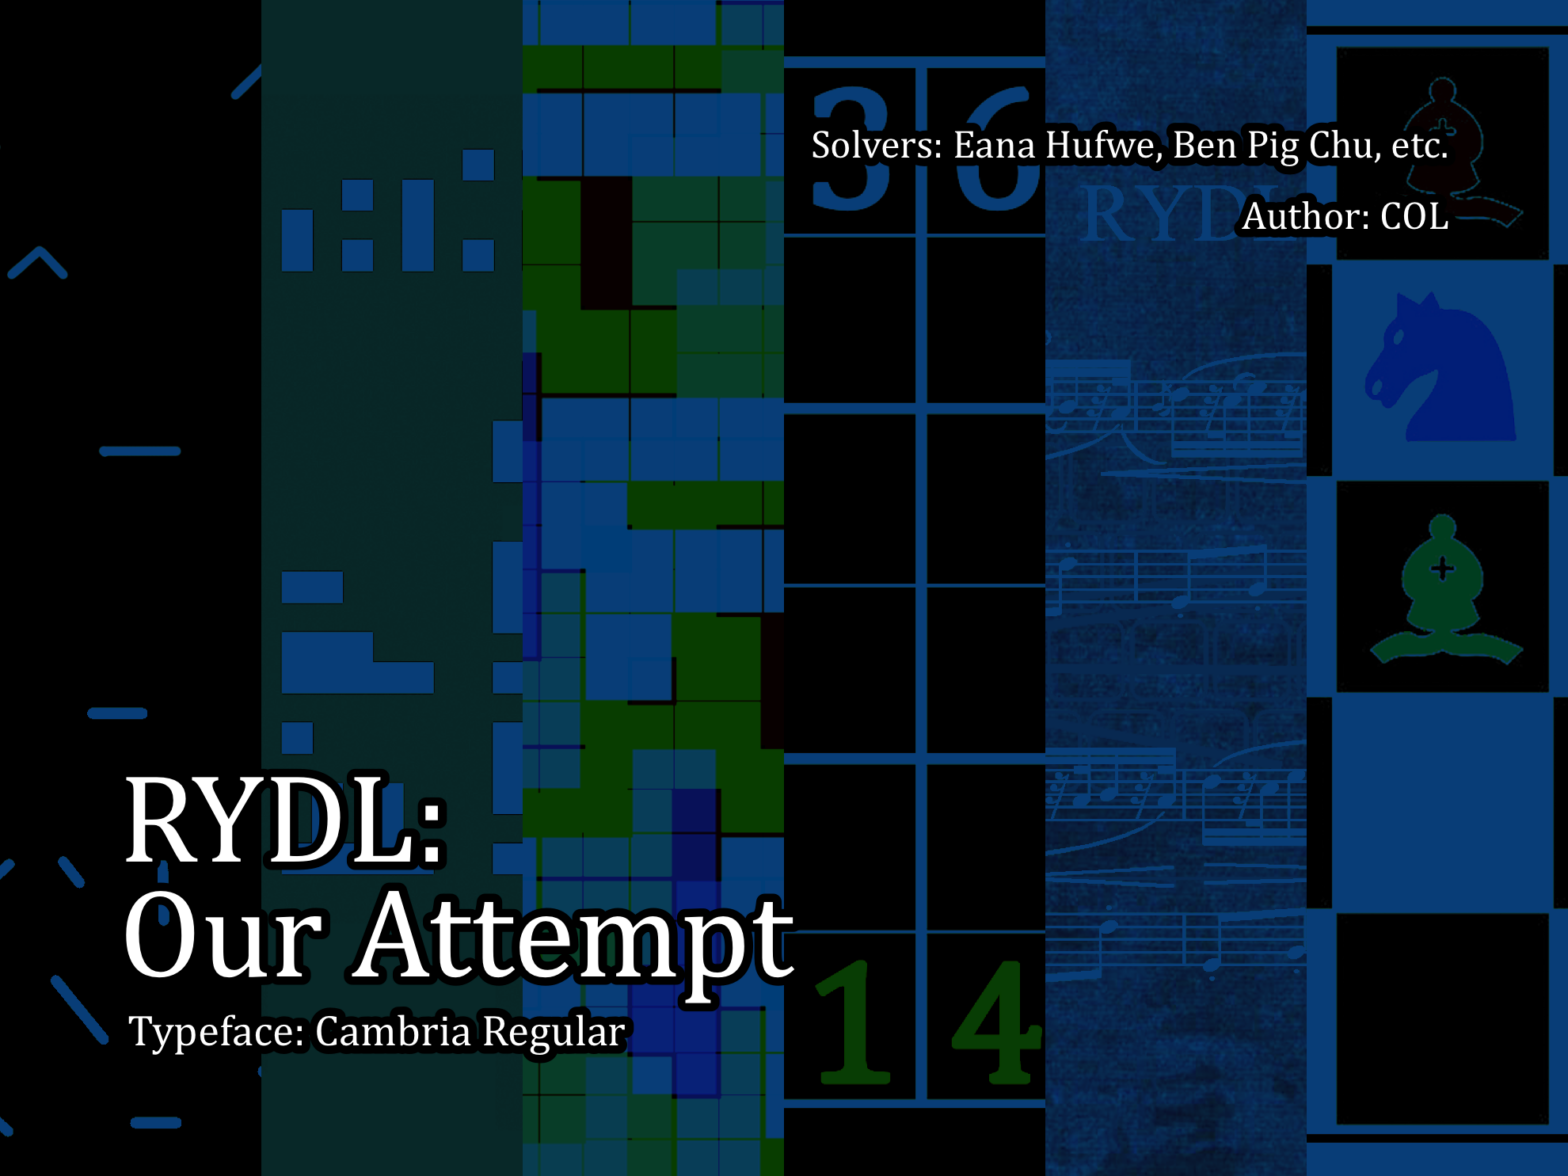 RYDL: Our Attempt